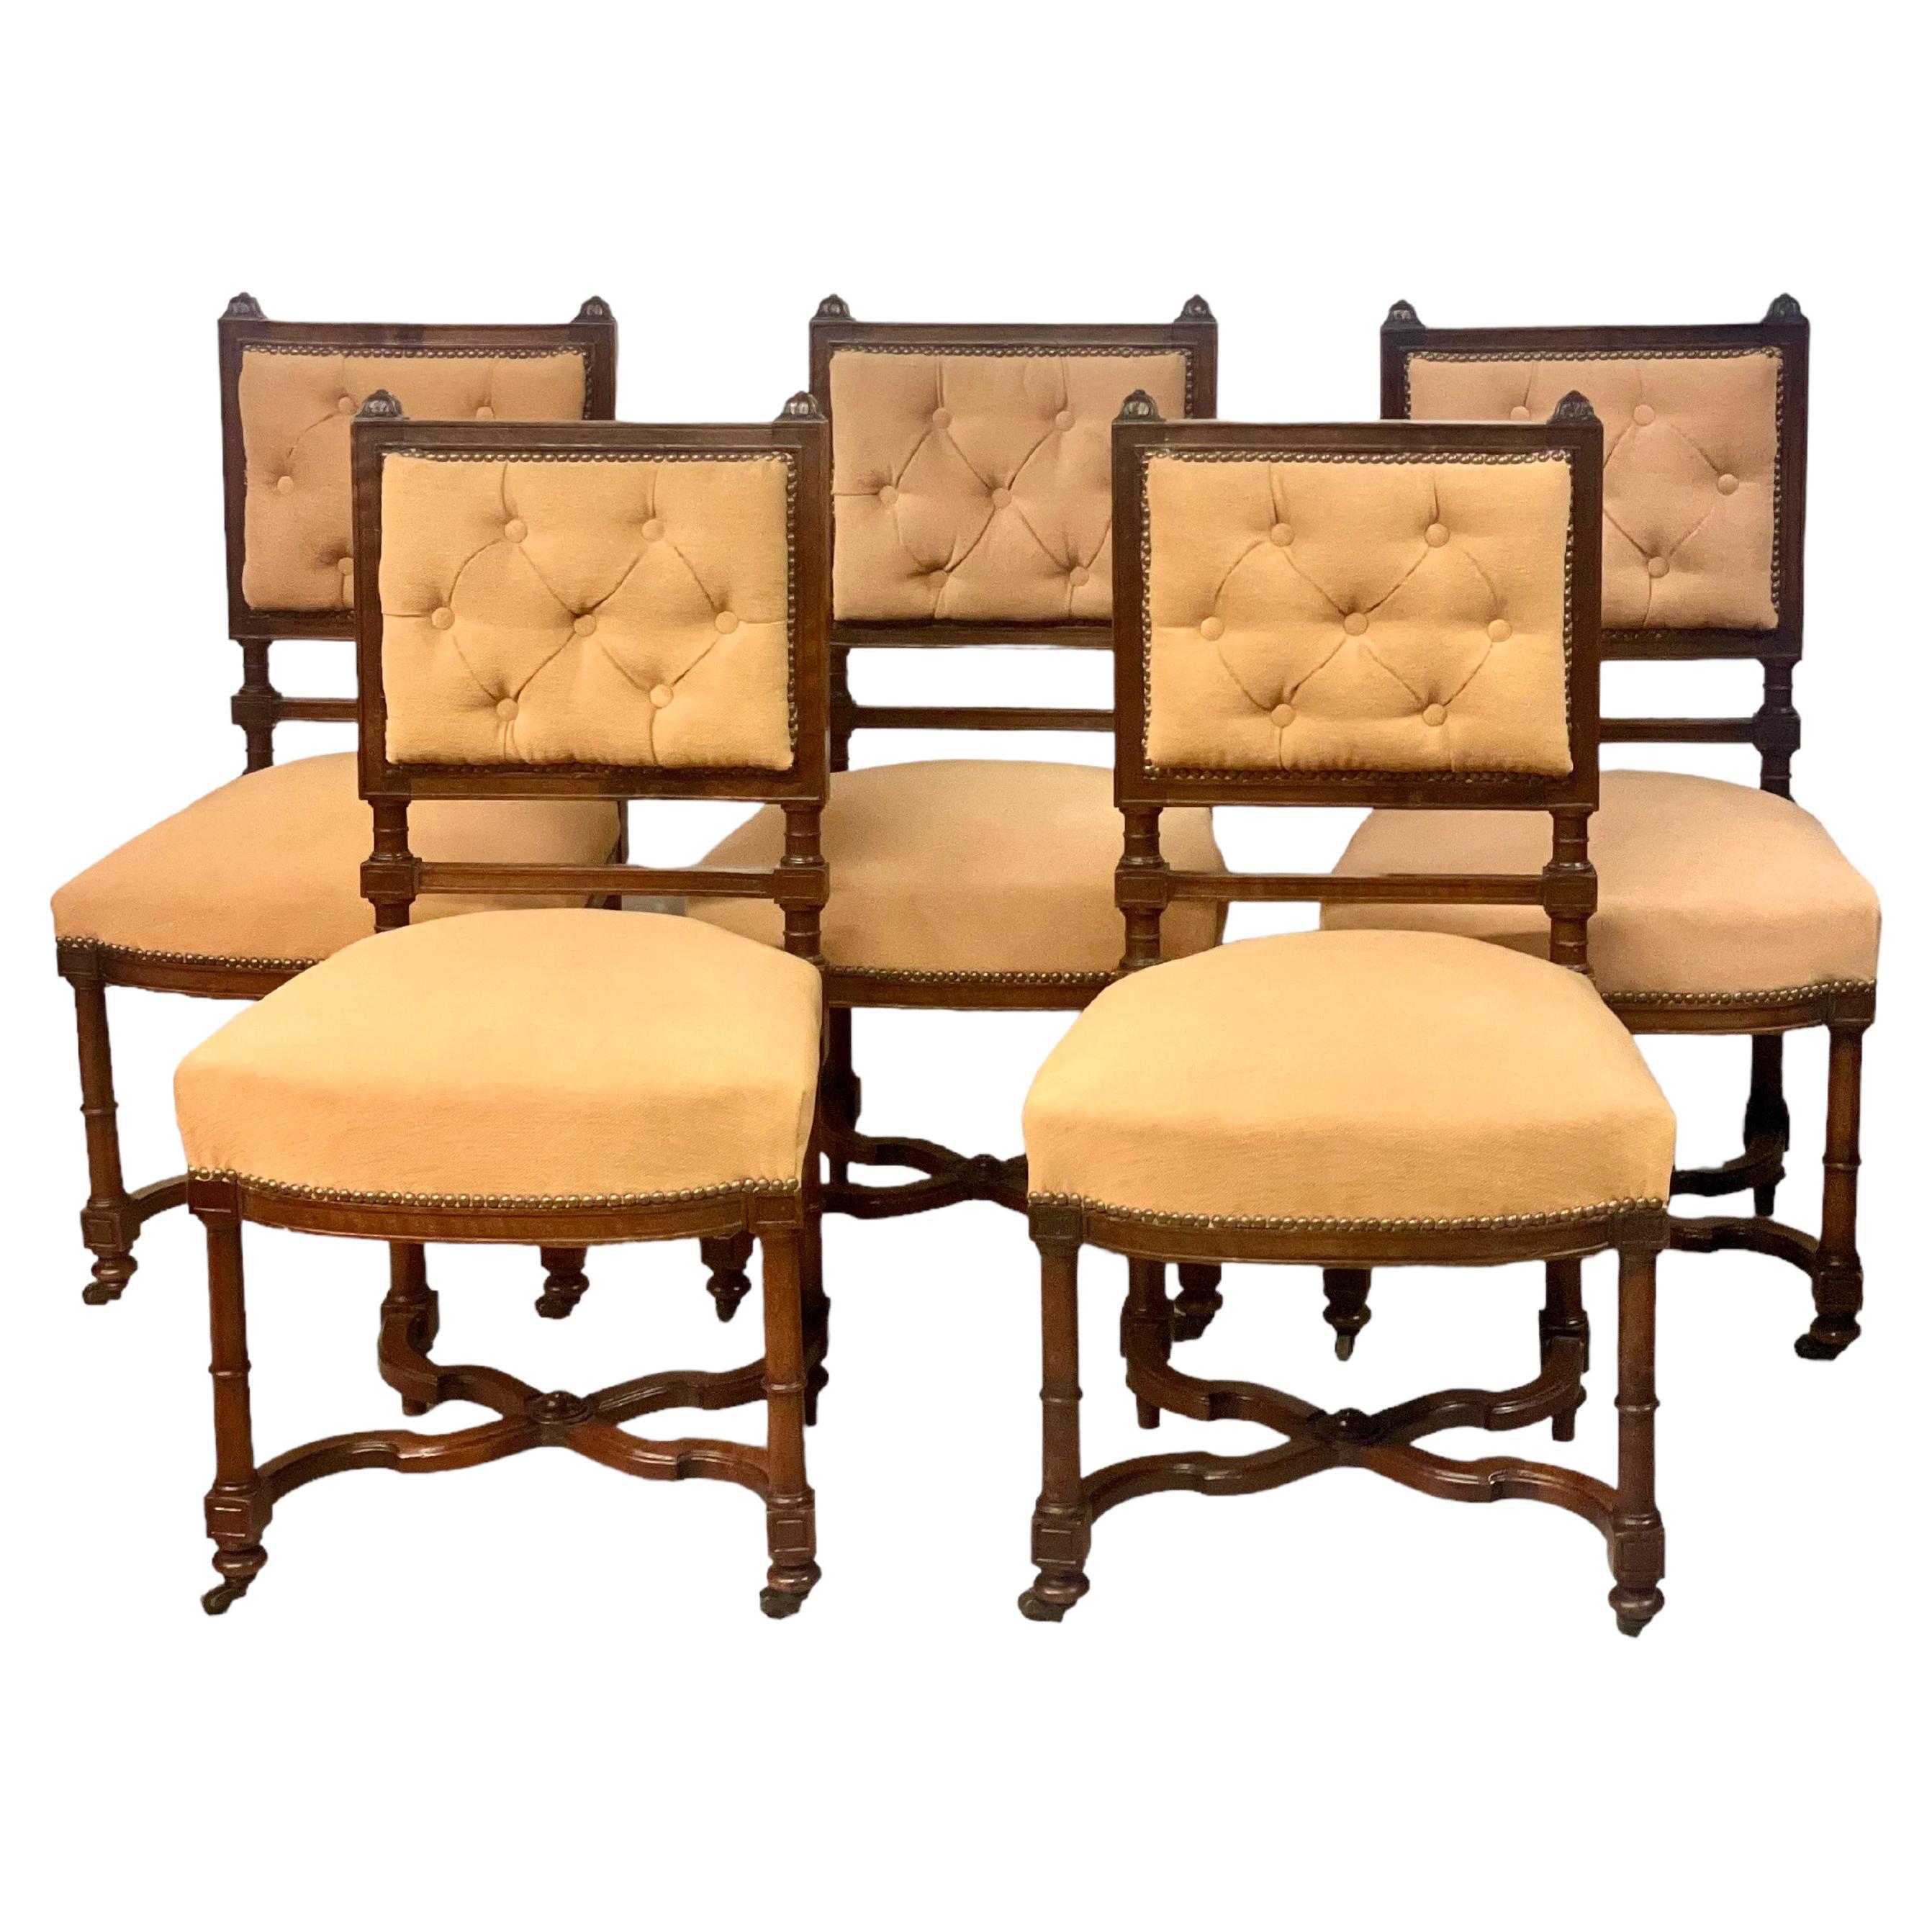 Set of Five Upholstered Louis XIII style Dining Chairs, 19th Century For Sale